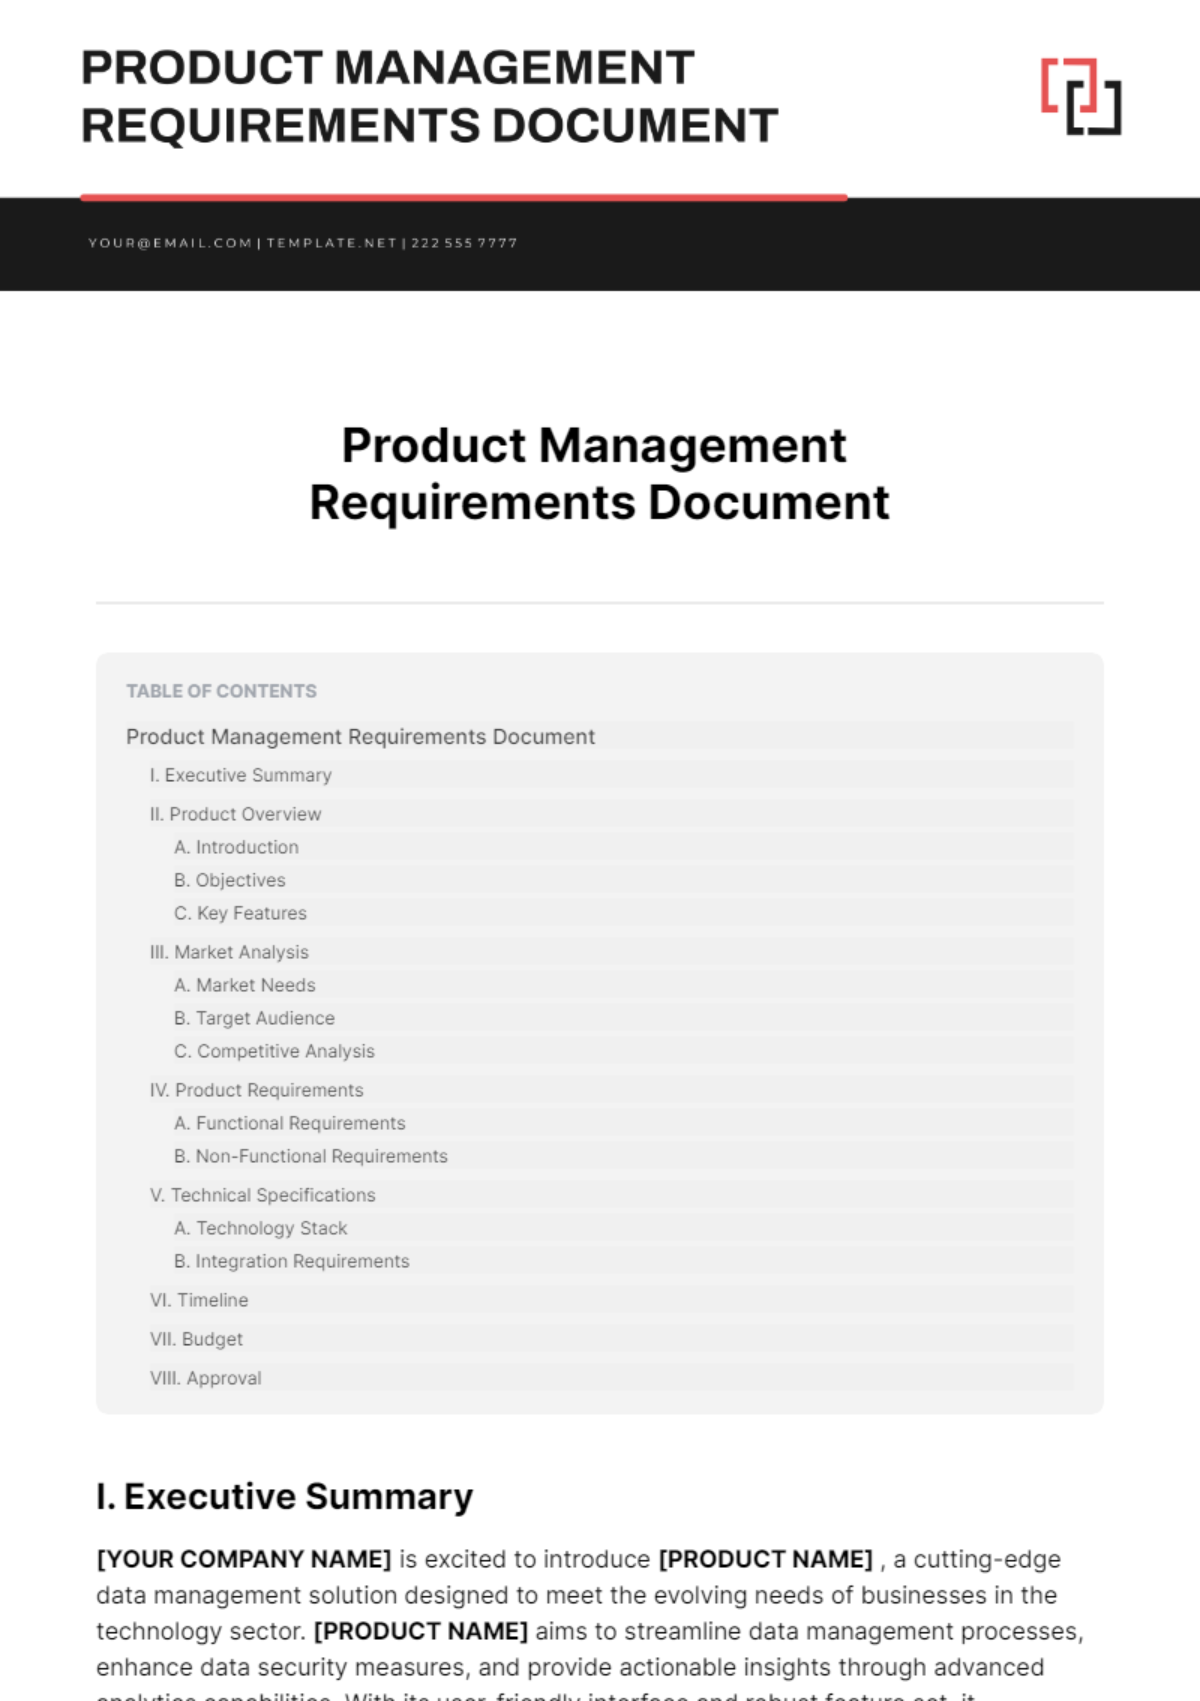 Product Management Requirements Document Template